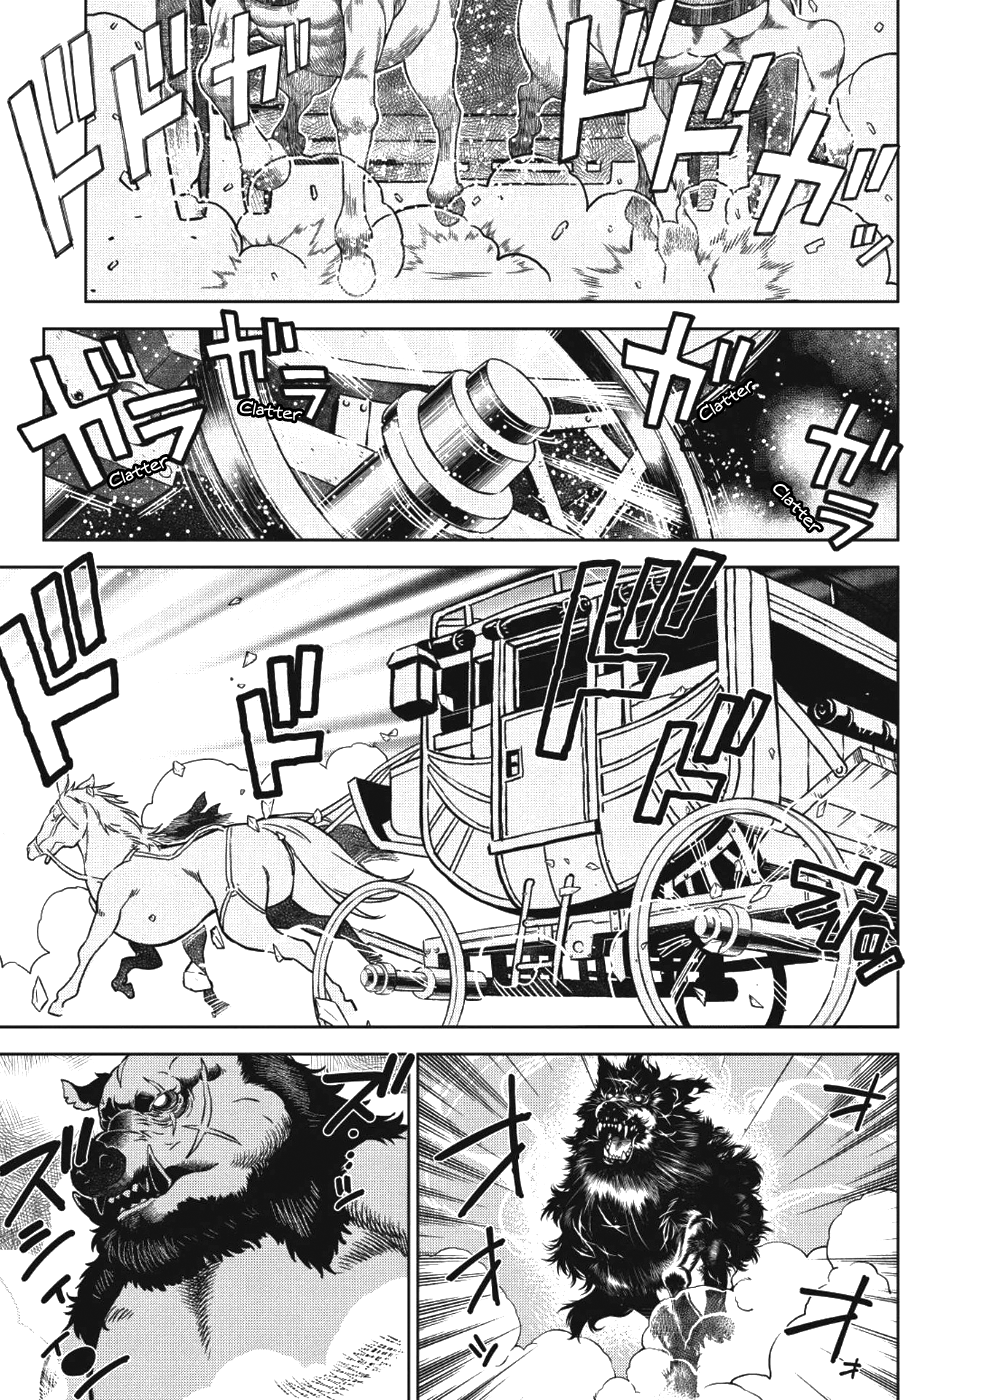 Break Through In Another World With Magical Eyes And Bullets!! Vol.1 Chapter 1 - Picture 2